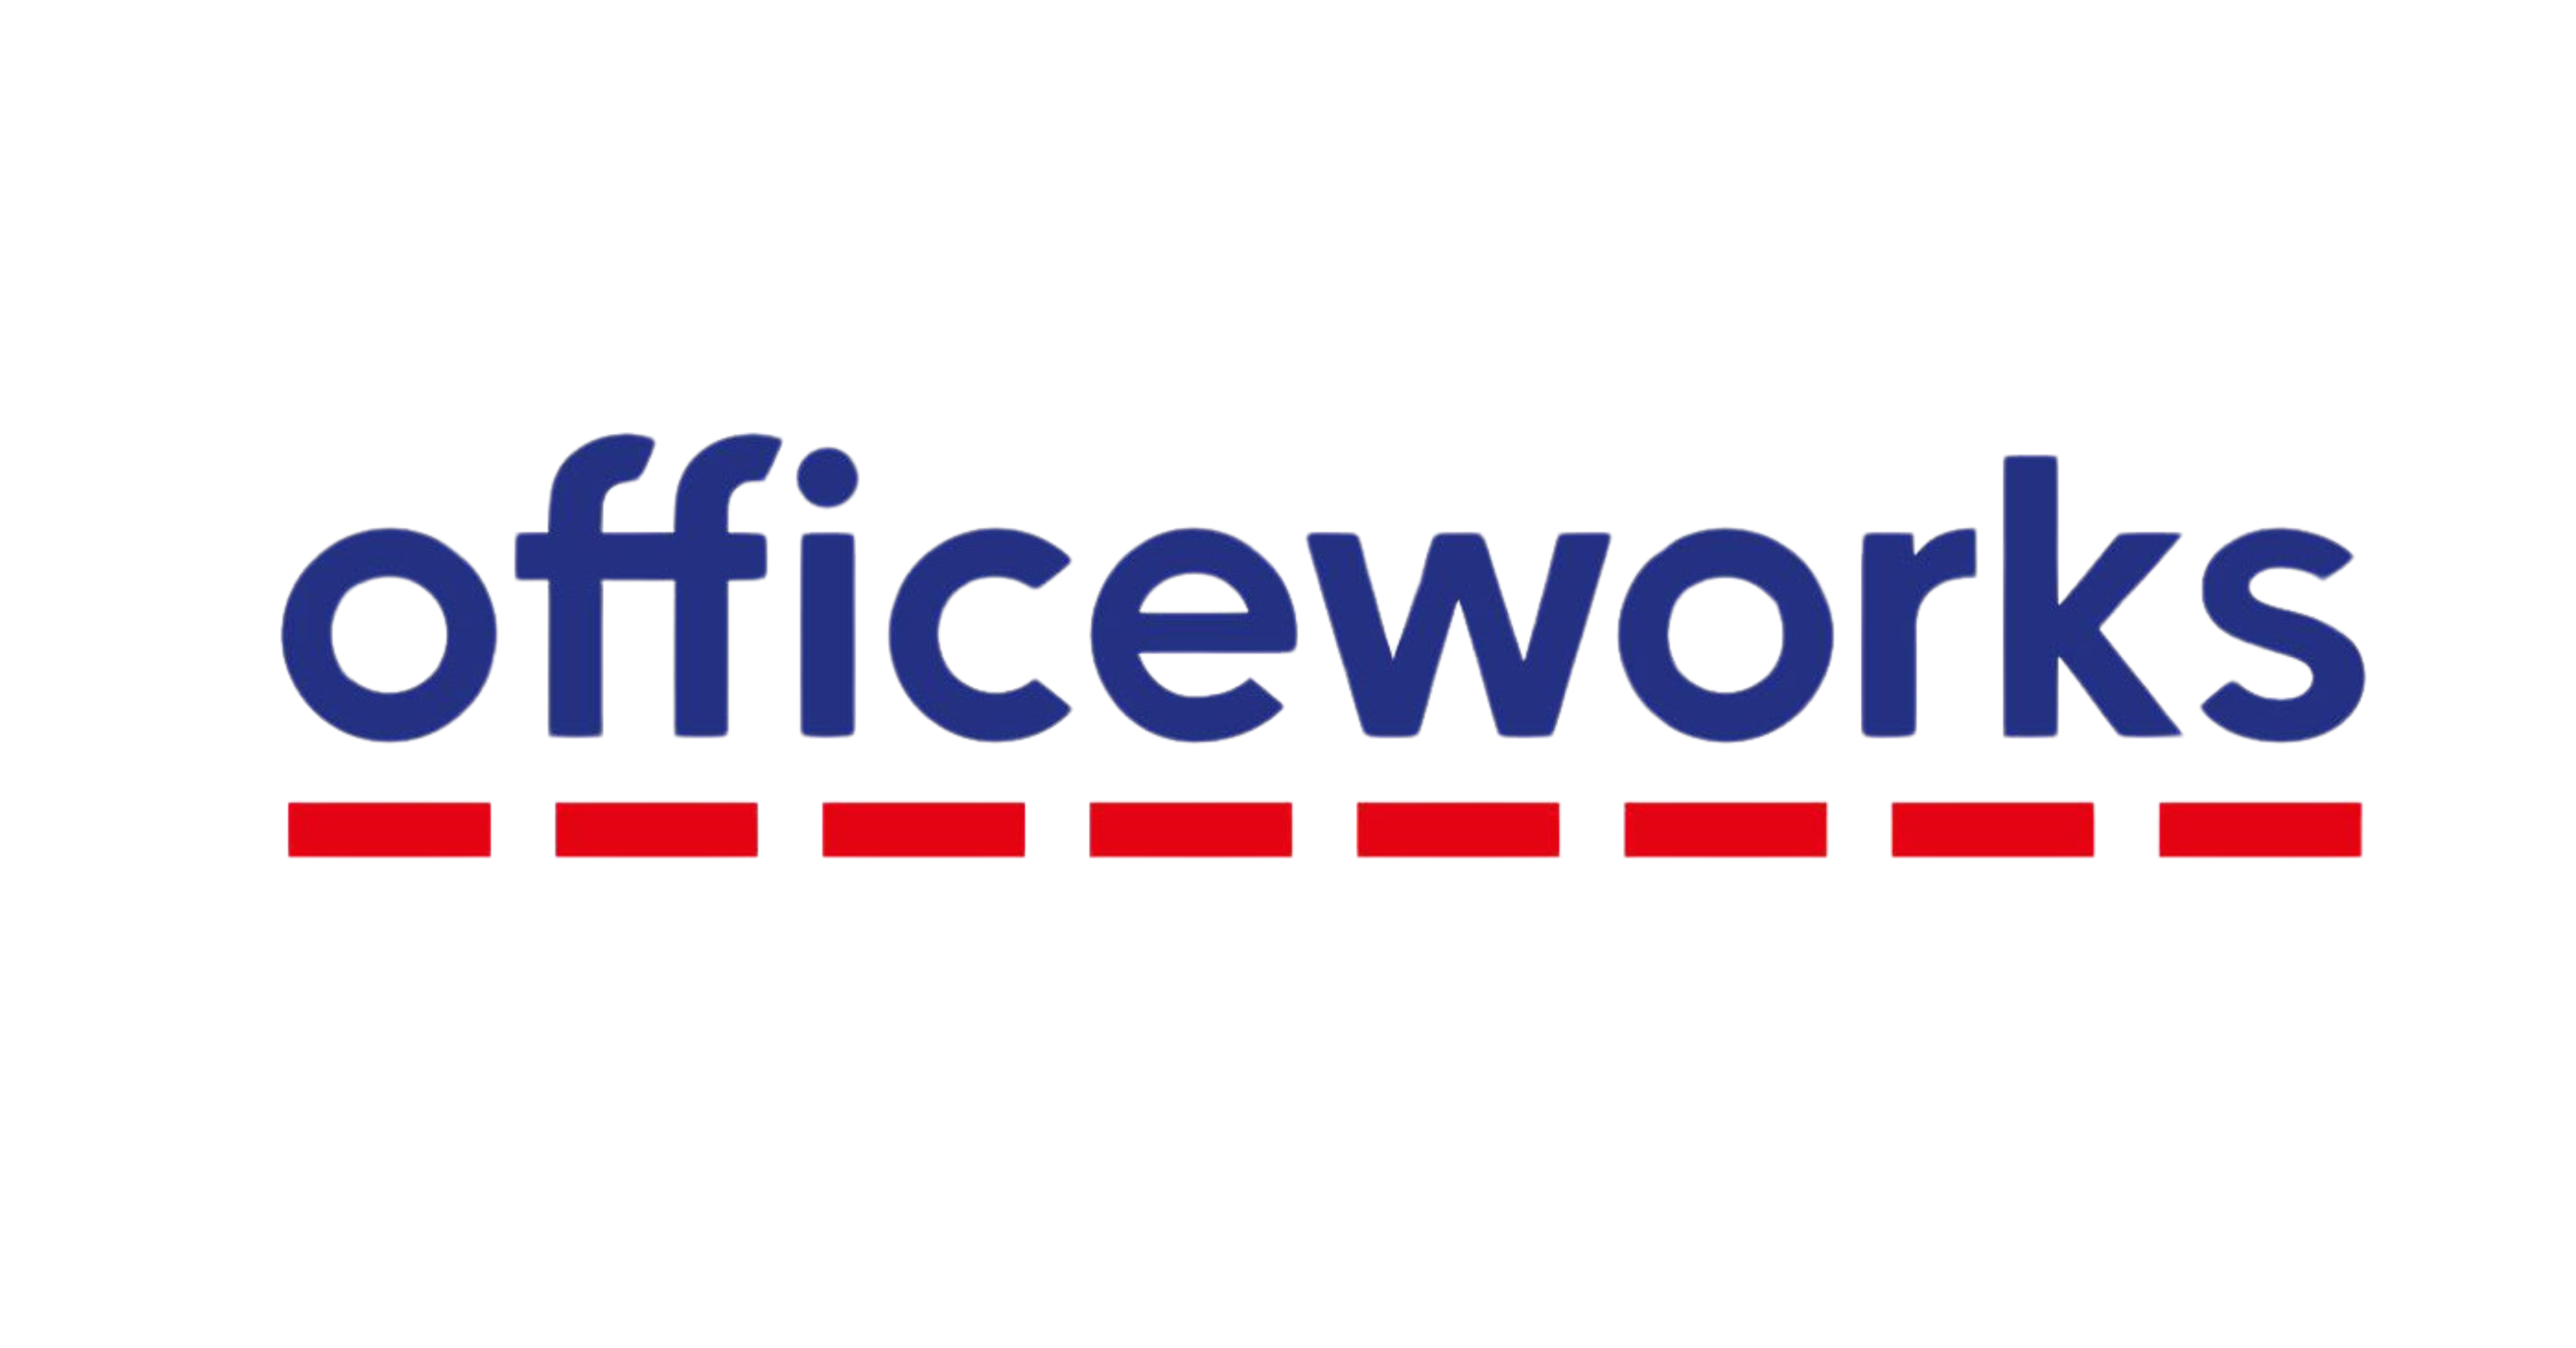 Officeworks logo, a client of Integris Group Services